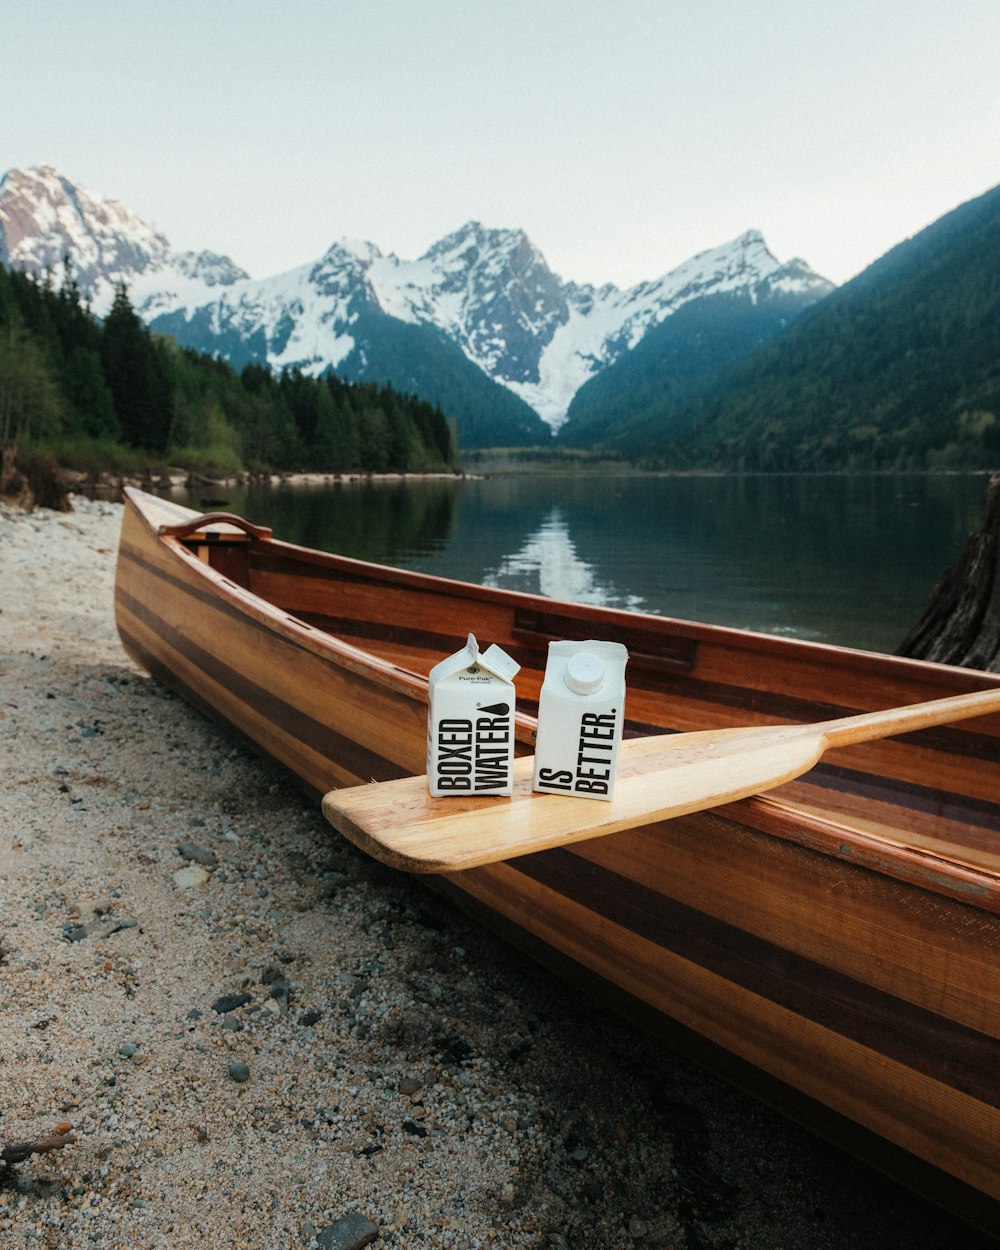 a wooden boat on a lake with mountains in the background